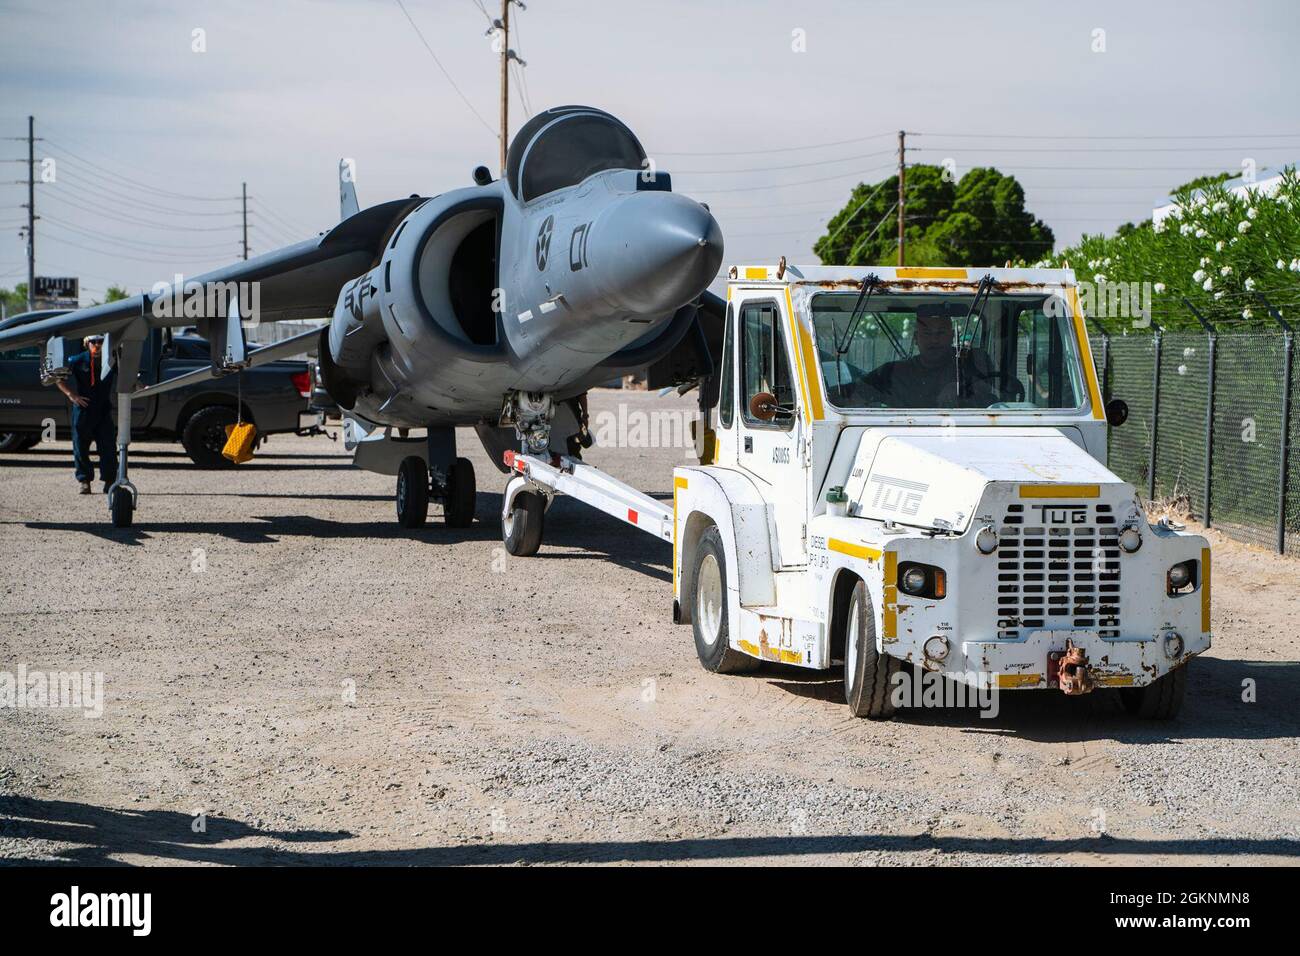 An AV-8B Harrier jet is transported across Marine Corps Air Station Yuma, June 7, 2021. The Harrier is now a static display near the entrance of the Air Station. Stock Photo